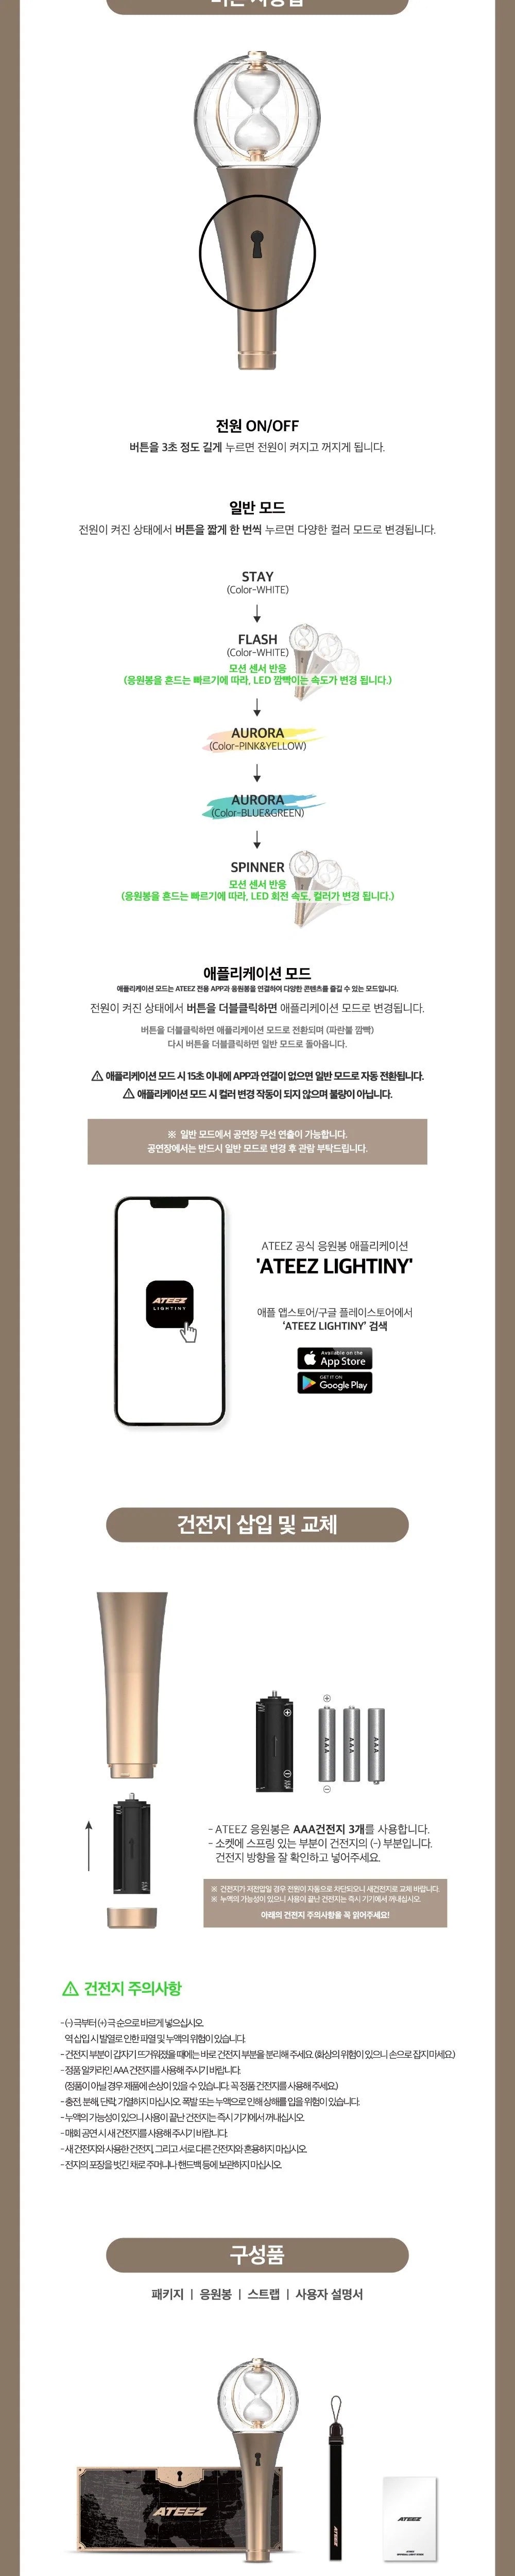 ATEEZ - OFFICIAL LIGHT STICK VER.2 Infographic 2